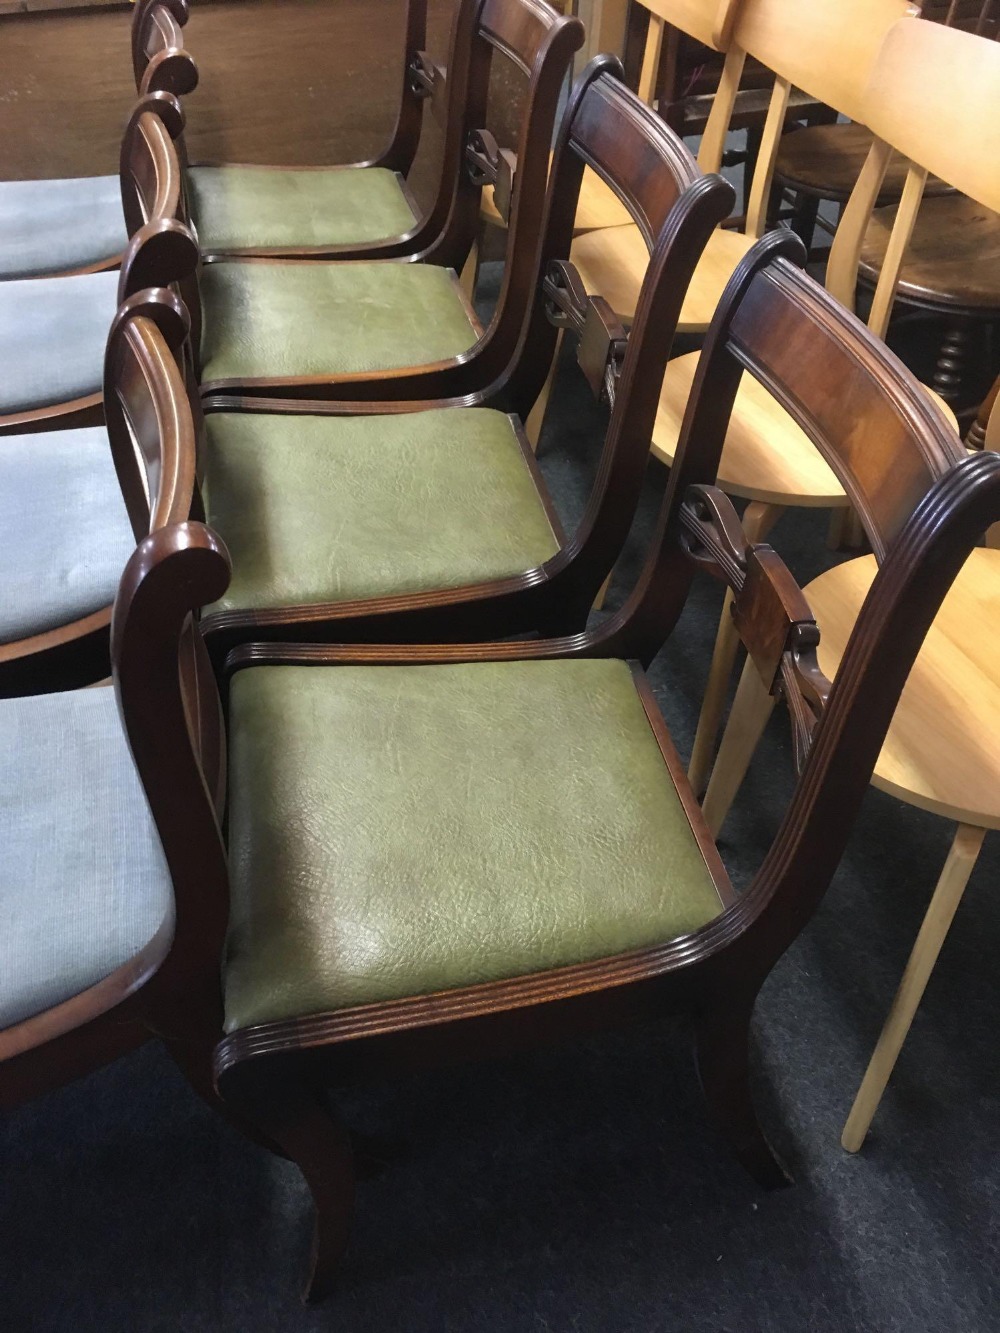 SET OF 4 MODERN MAHOGANY DINING CHAIRS WITH GREEN LEATHER SEATS - Image 2 of 3